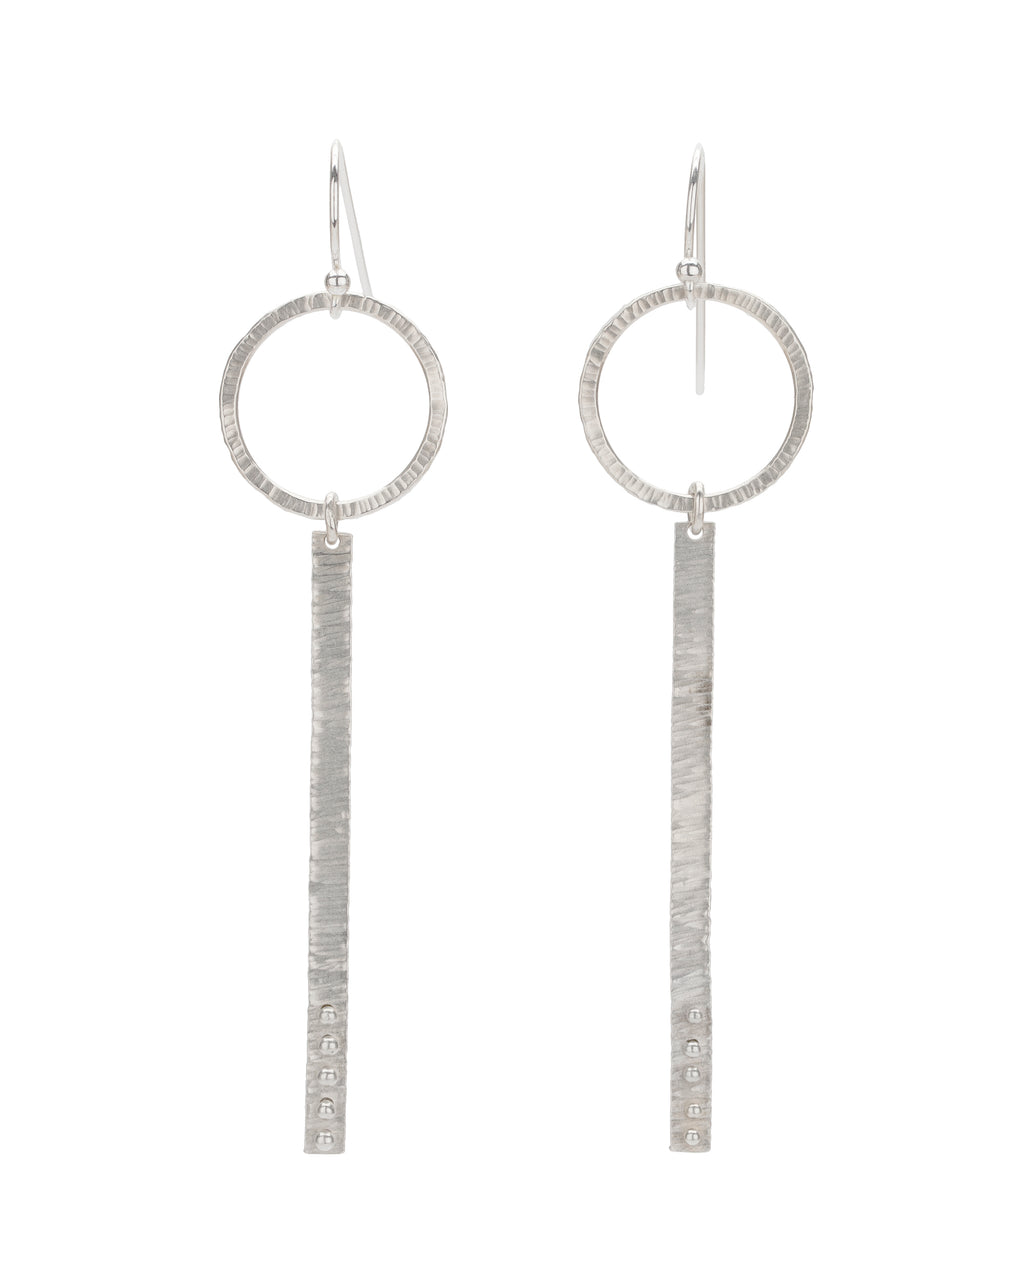 Textured Branch & Circle Earrings